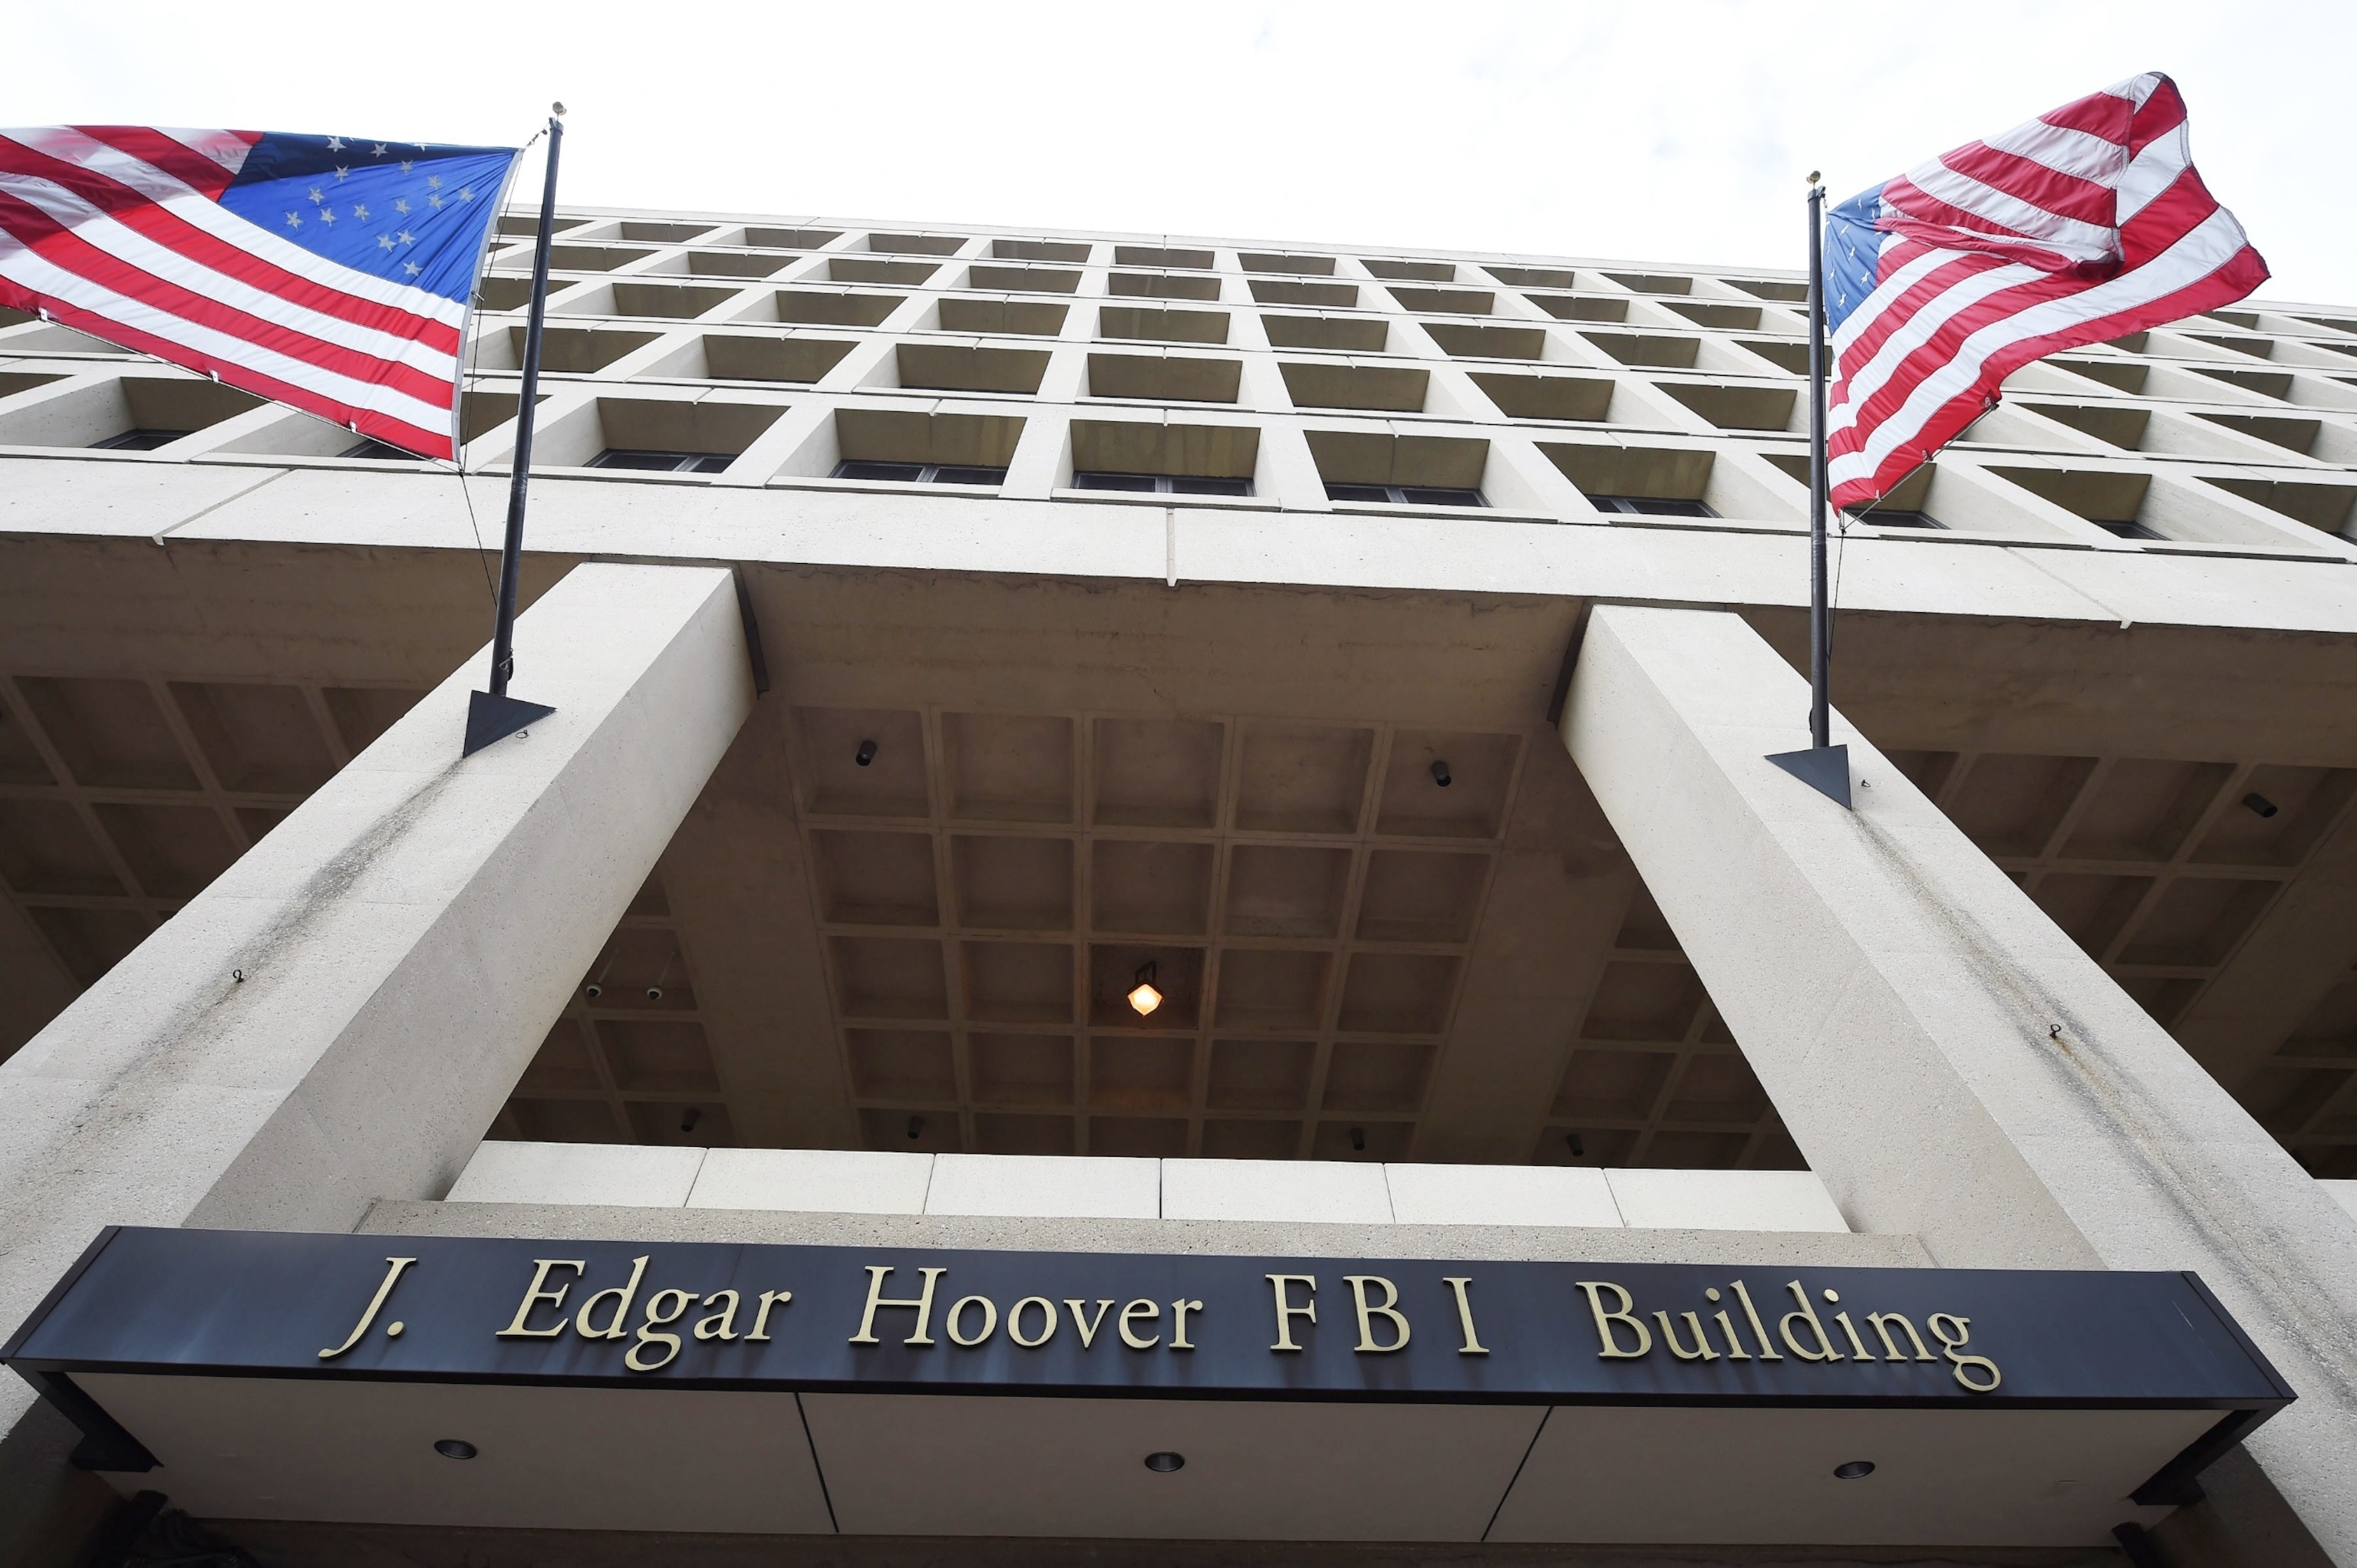 PHOTO: The exterior of the J. Edgar Hoover Building, headquarters of the FBI, is seen on Aug. 20, 2015 in Washington, DC. 